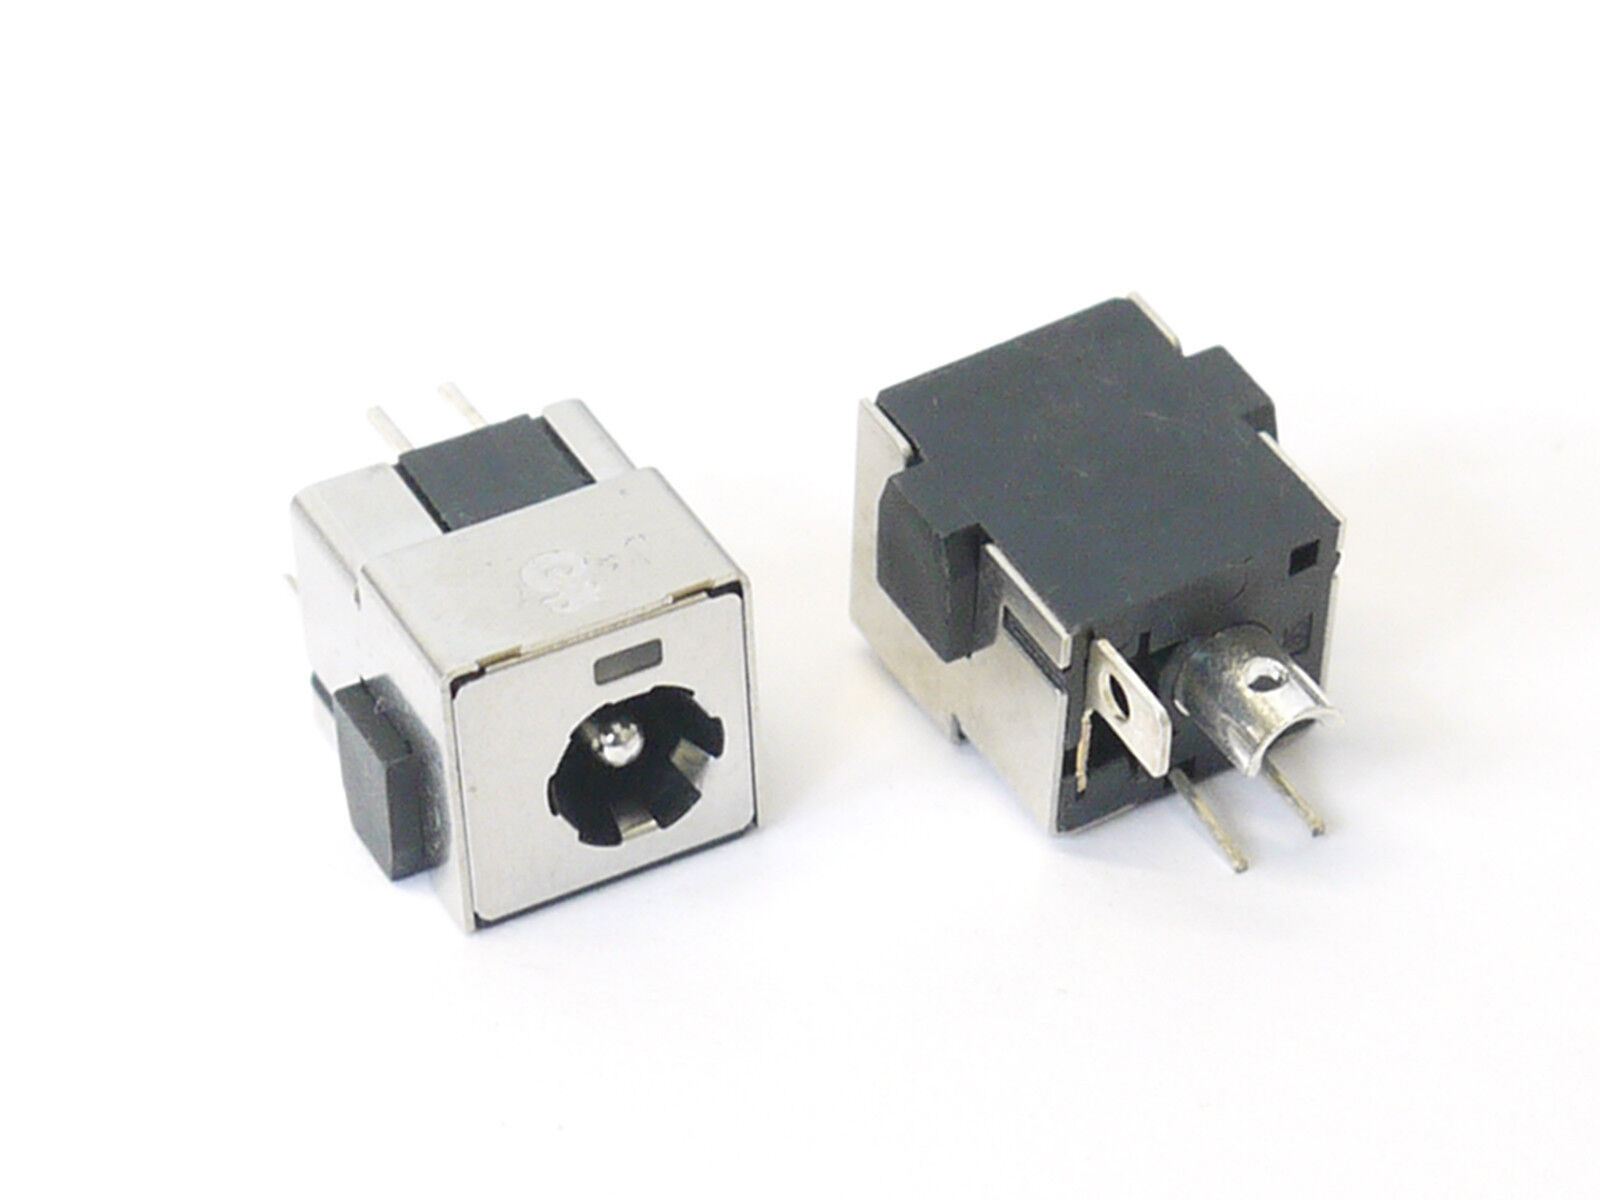 Lot of NEW DC POWER JACK SOCKET for HP G7000 Compaq A900 C700 V3000 Series